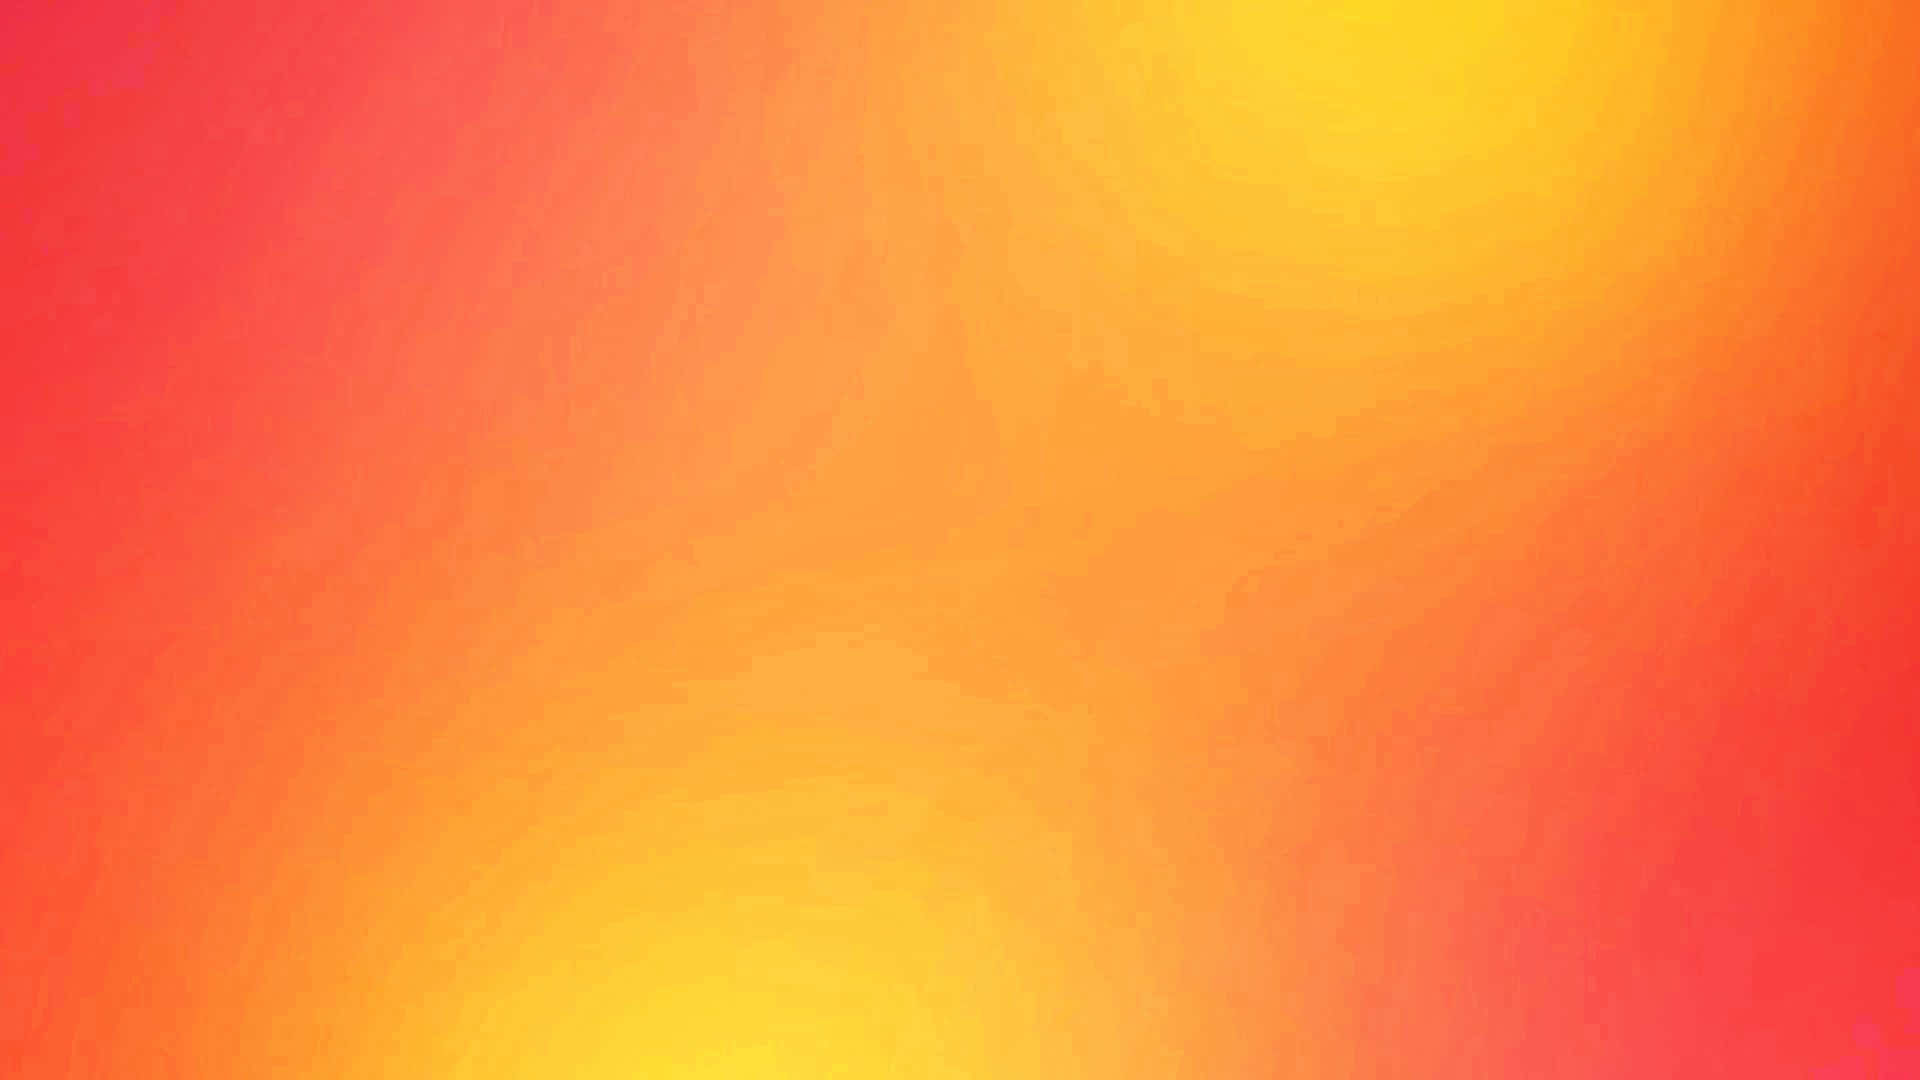 A Bright Orange And Yellow Background